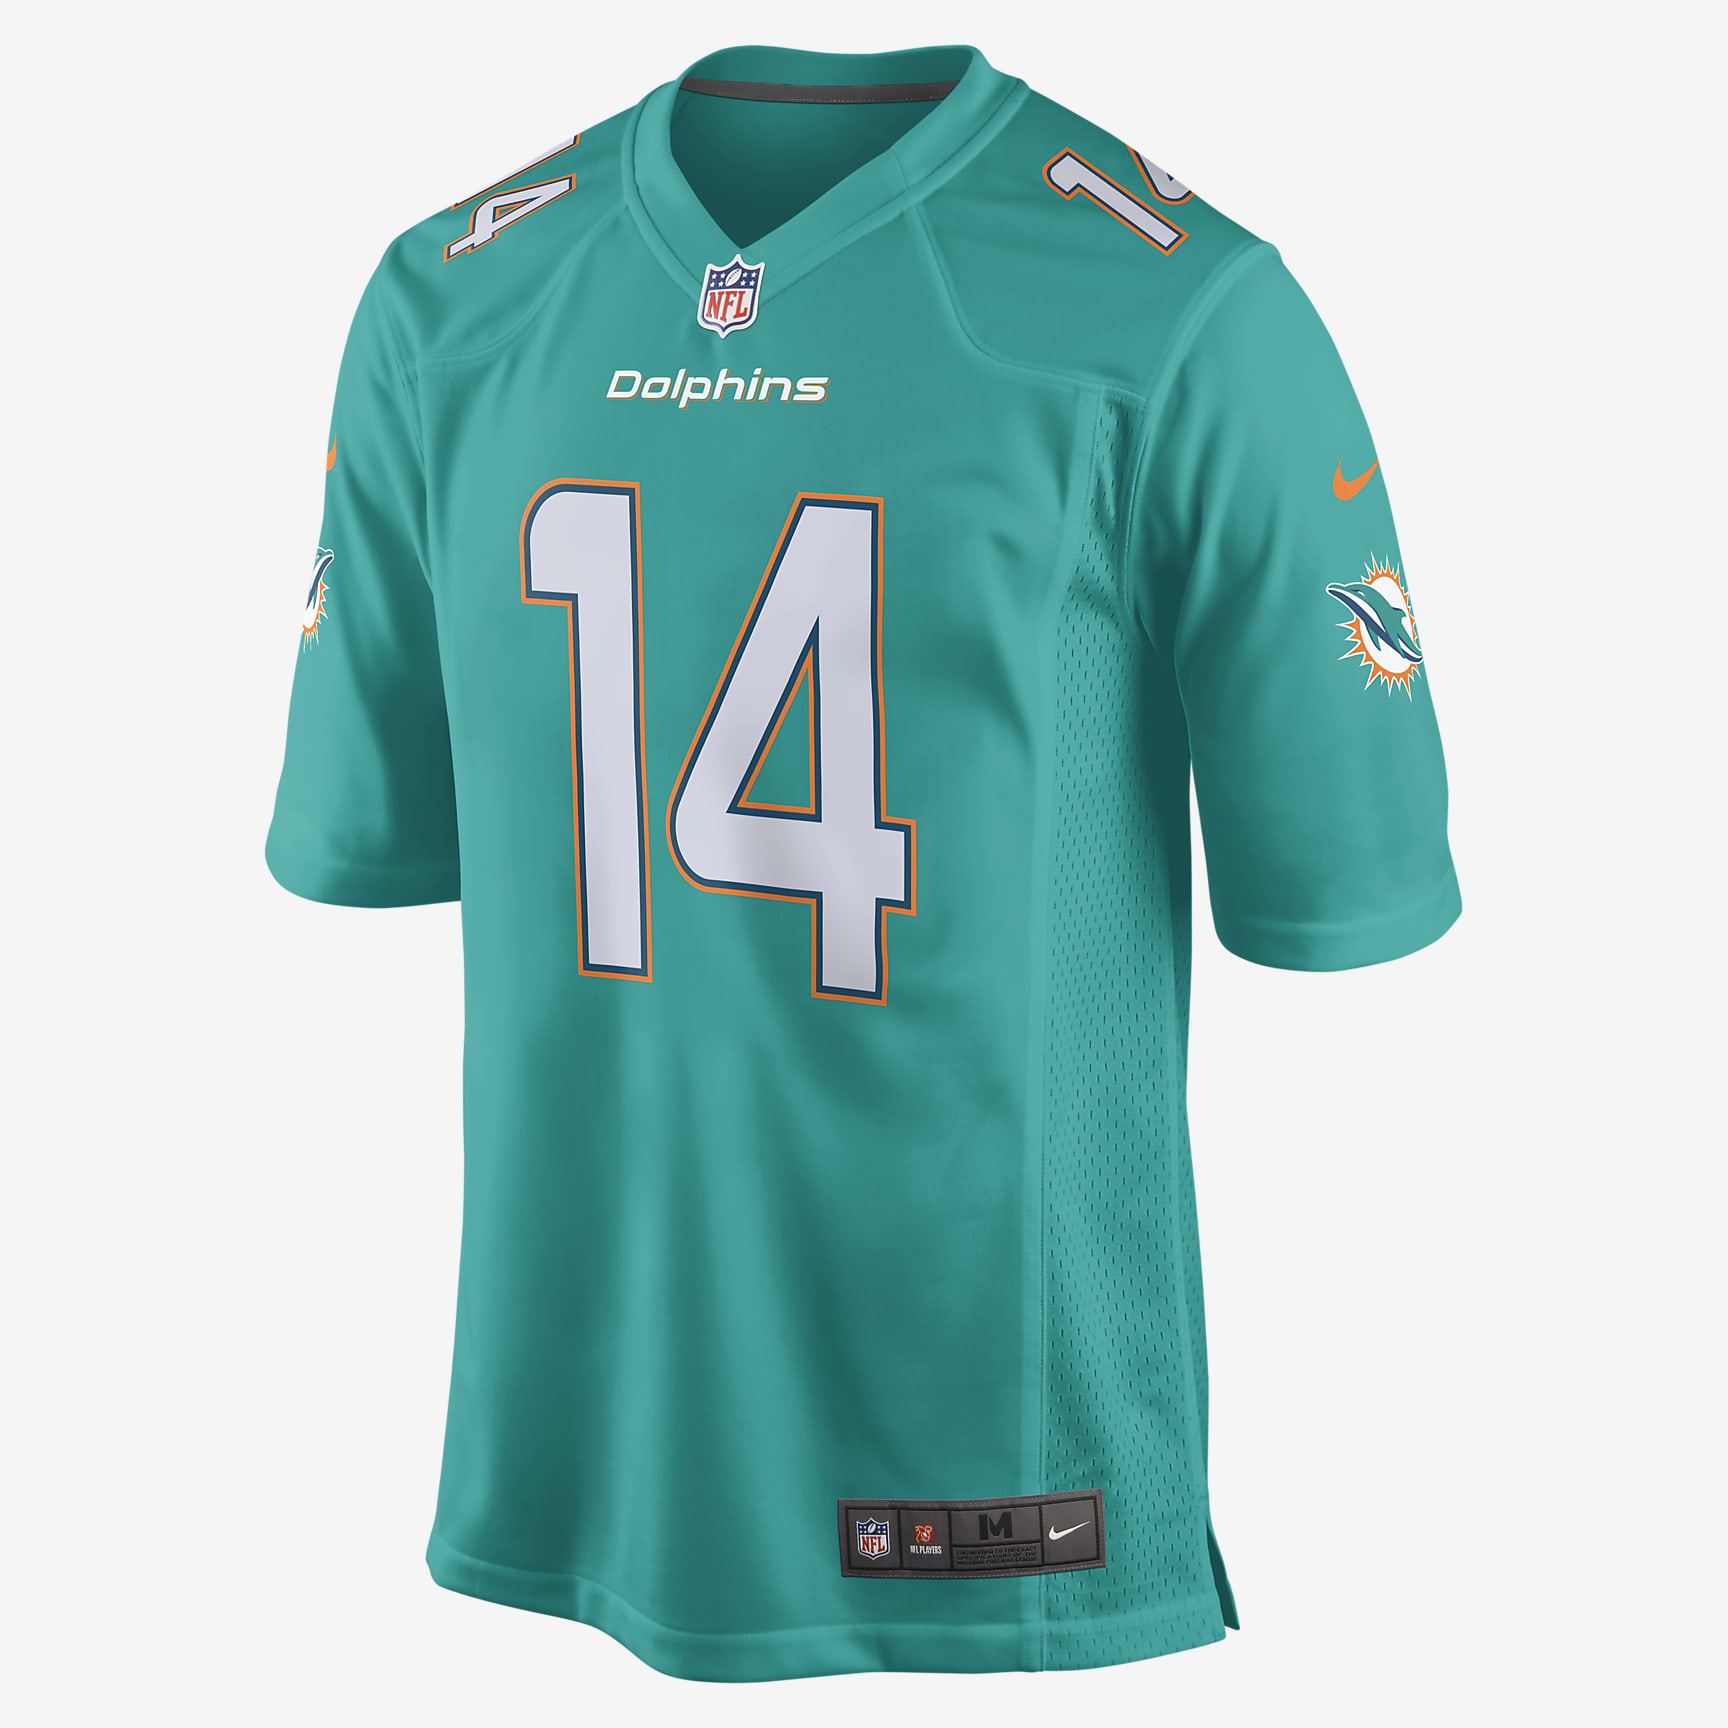 NFL Miami Dolphins (Jarvis Landry) Men's American Football Home Game ...